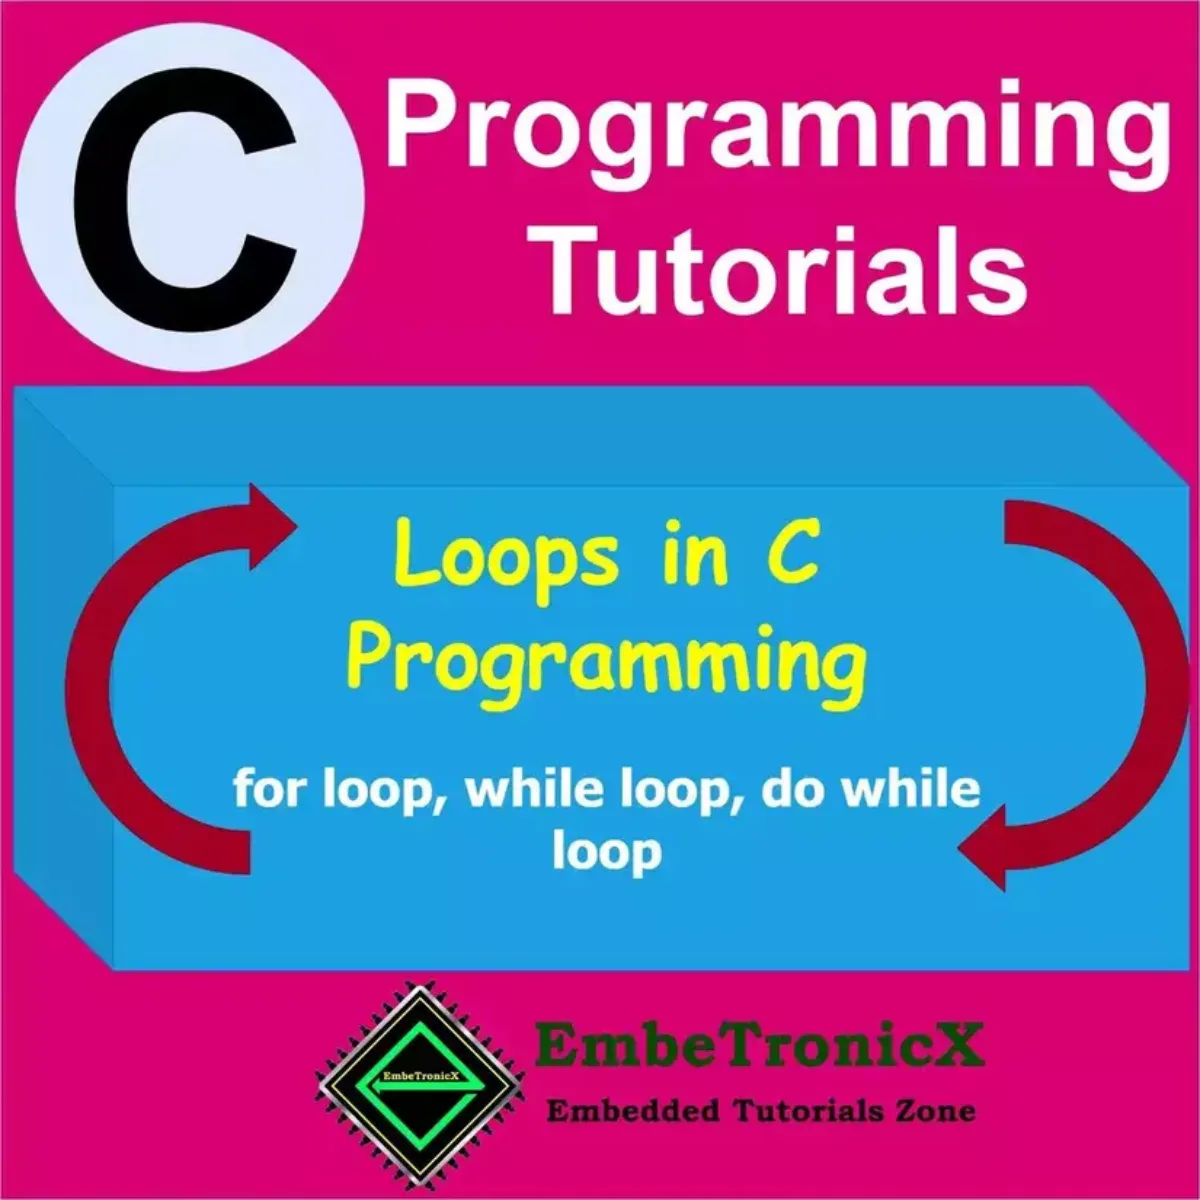 Loops in C - For, While, Do While looping control statements